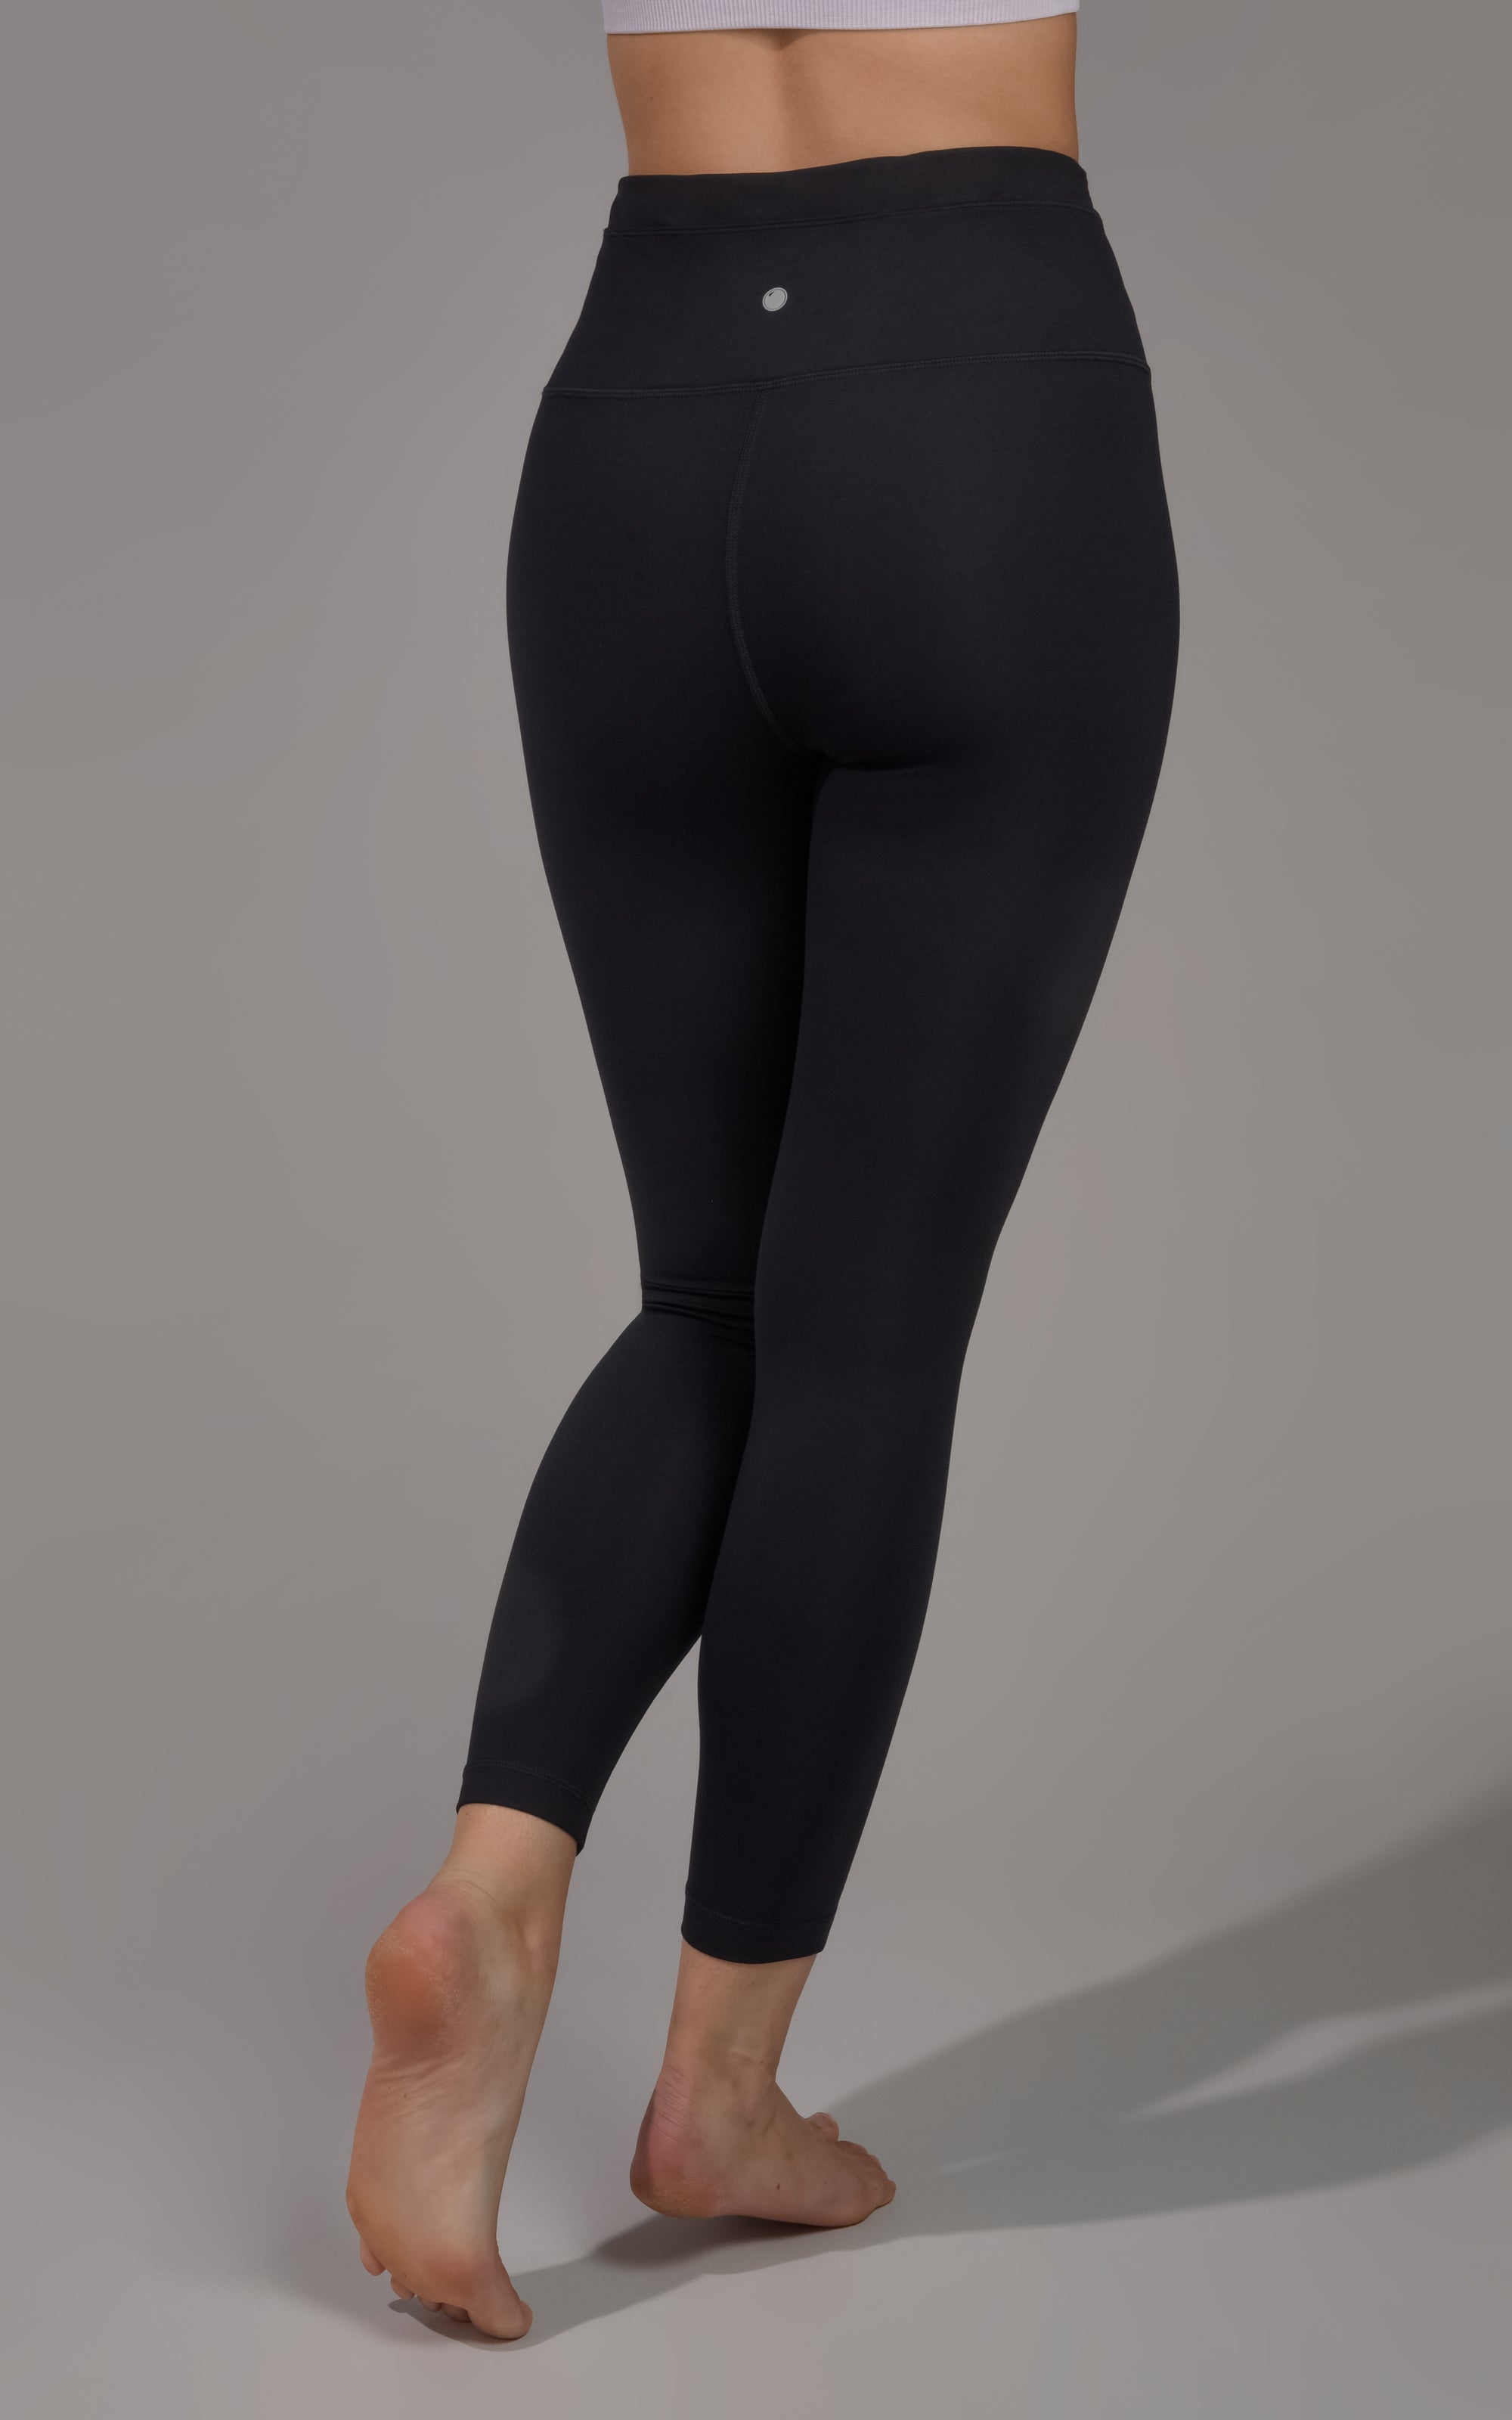 LYCRA brand - Activewear with the magic of SPANX built in? Yes, please.  SPANX Booty Boost Active Leggings are made with LYCRA® fiber for a smooth,  boosted fit even if you skipped